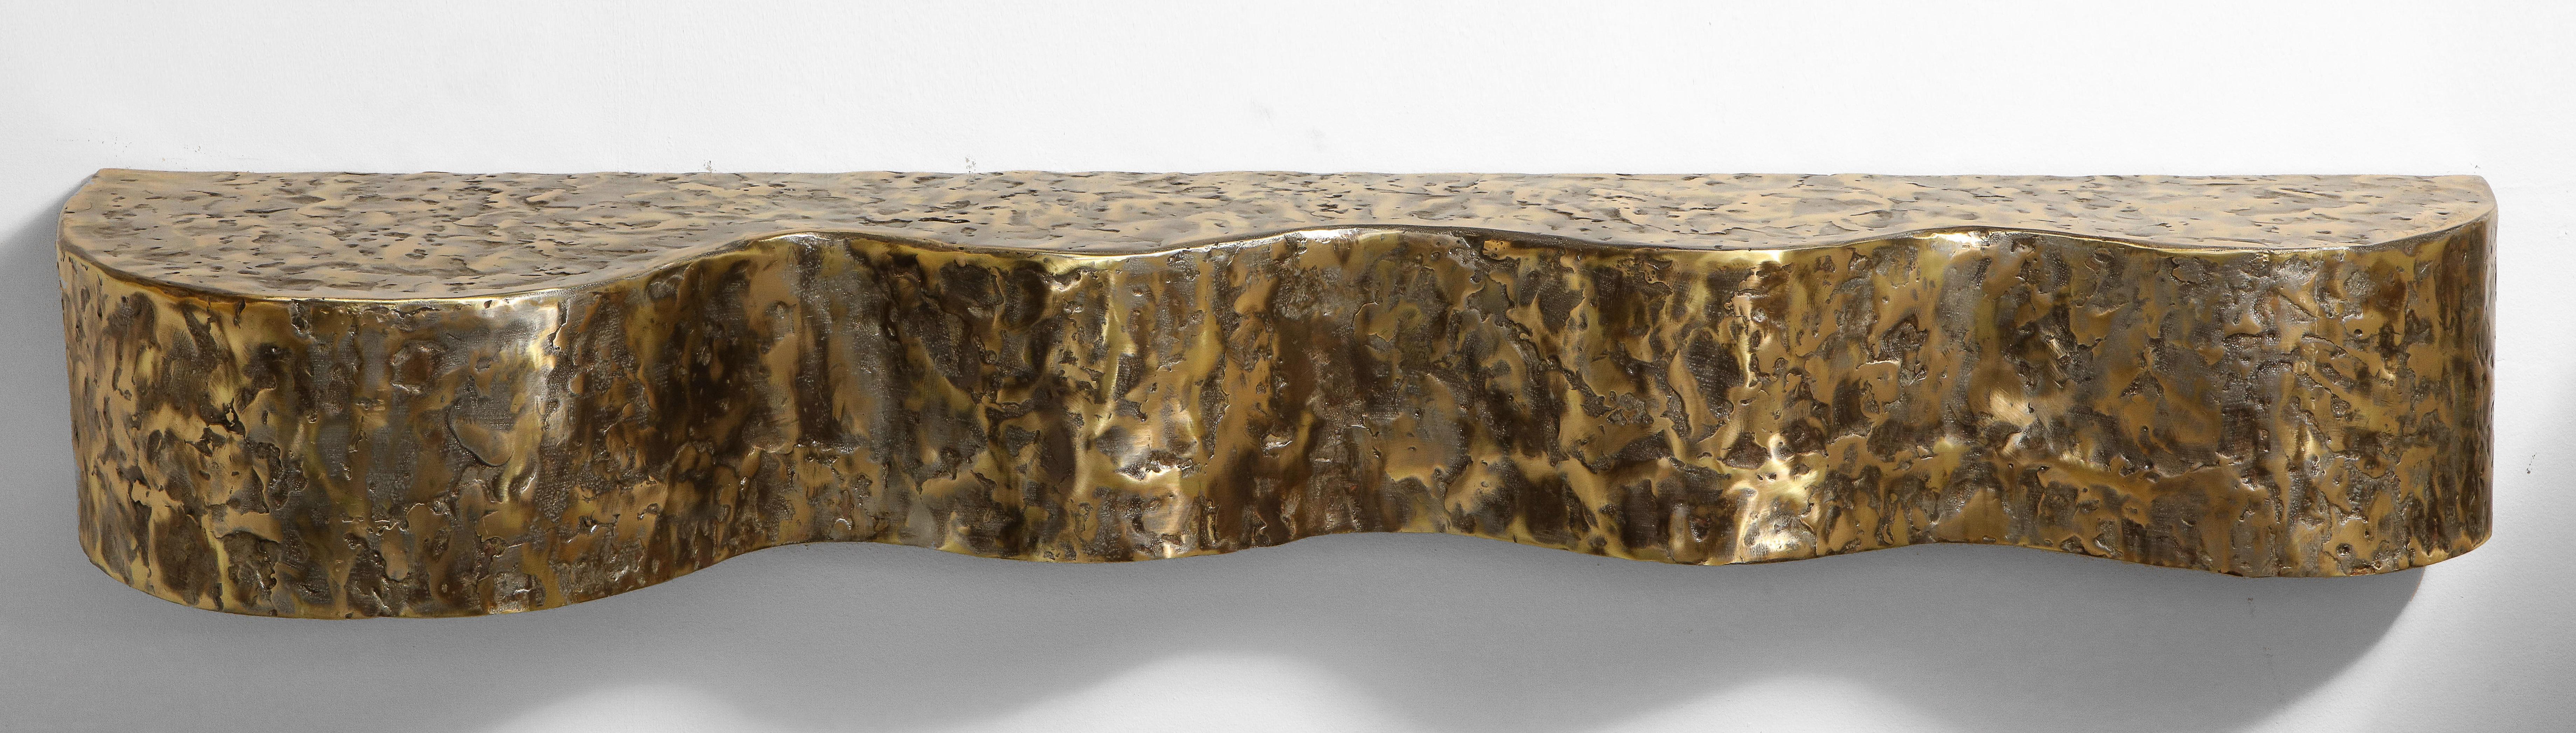 The organic undulating formed table cast and fabricated in bronze, brass, pewter and steel. Mounted on a its original bracket. 

Signed Silas Seandel.